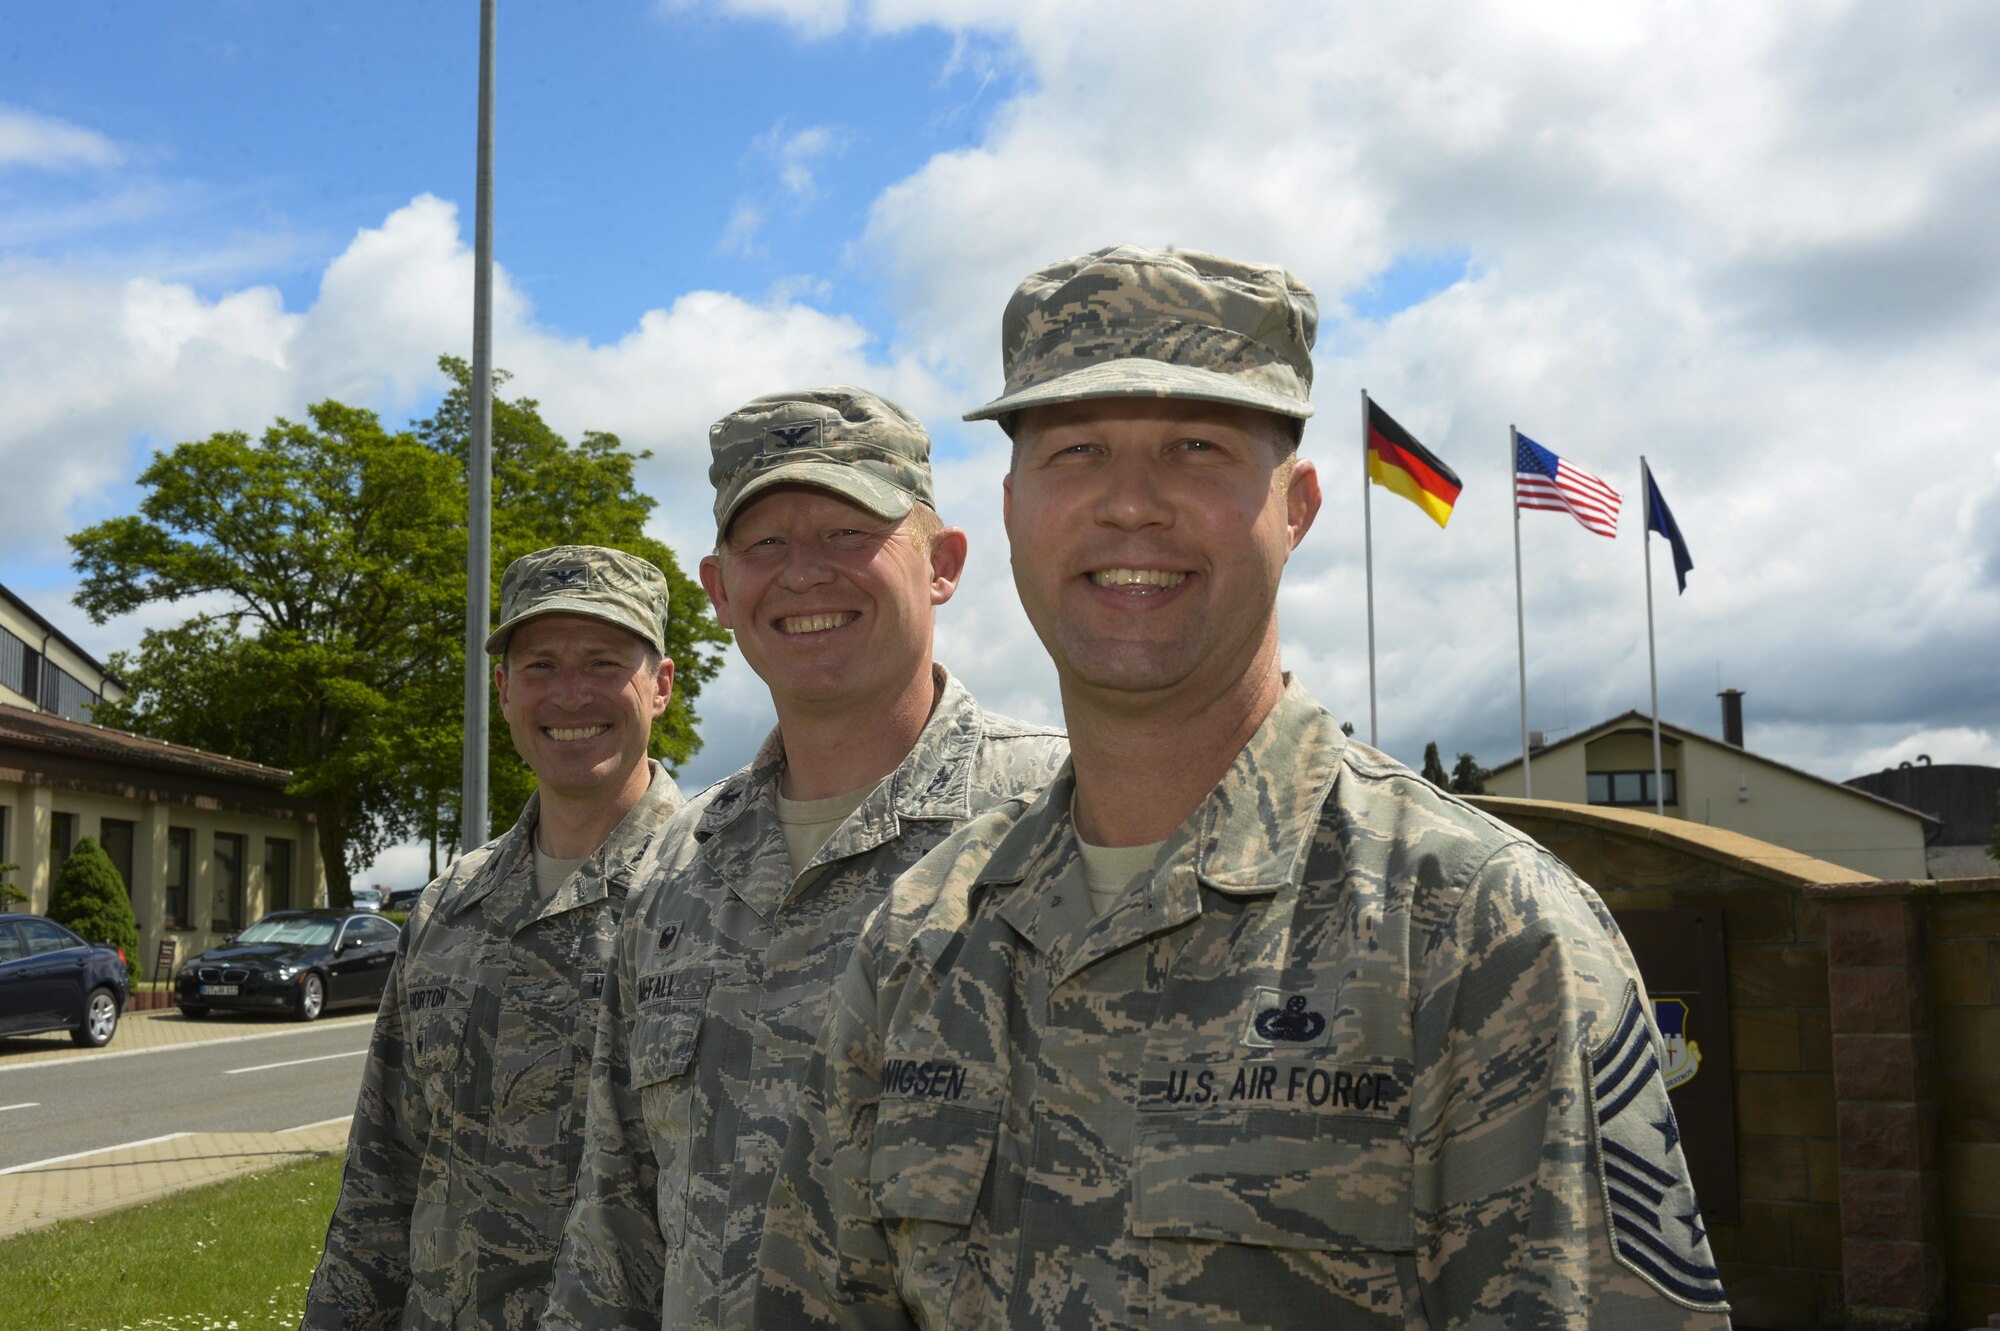 U.S. Air Force Chief Master Sgt. Edwin Ludwigsen, 52nd Fighter Wing command chief, right, poses next to U.S. Air Force Col. Joe McFall, 52nd FW commander, center, and U.S. Air Force Col. Steven Horton, 52nd FW vice commander, left, outside of wing headquarters in Spangdahlem Air Base, Germany, June 2, 2016. Ludwigsen assumed the command chief position May 22, 2016, from outgoing command chief, U.S. Air Force Chief Master Sgt. Brian Gates. (U.S. Air Force photo by Staff Sgt. Joe W. McFadden/Released)